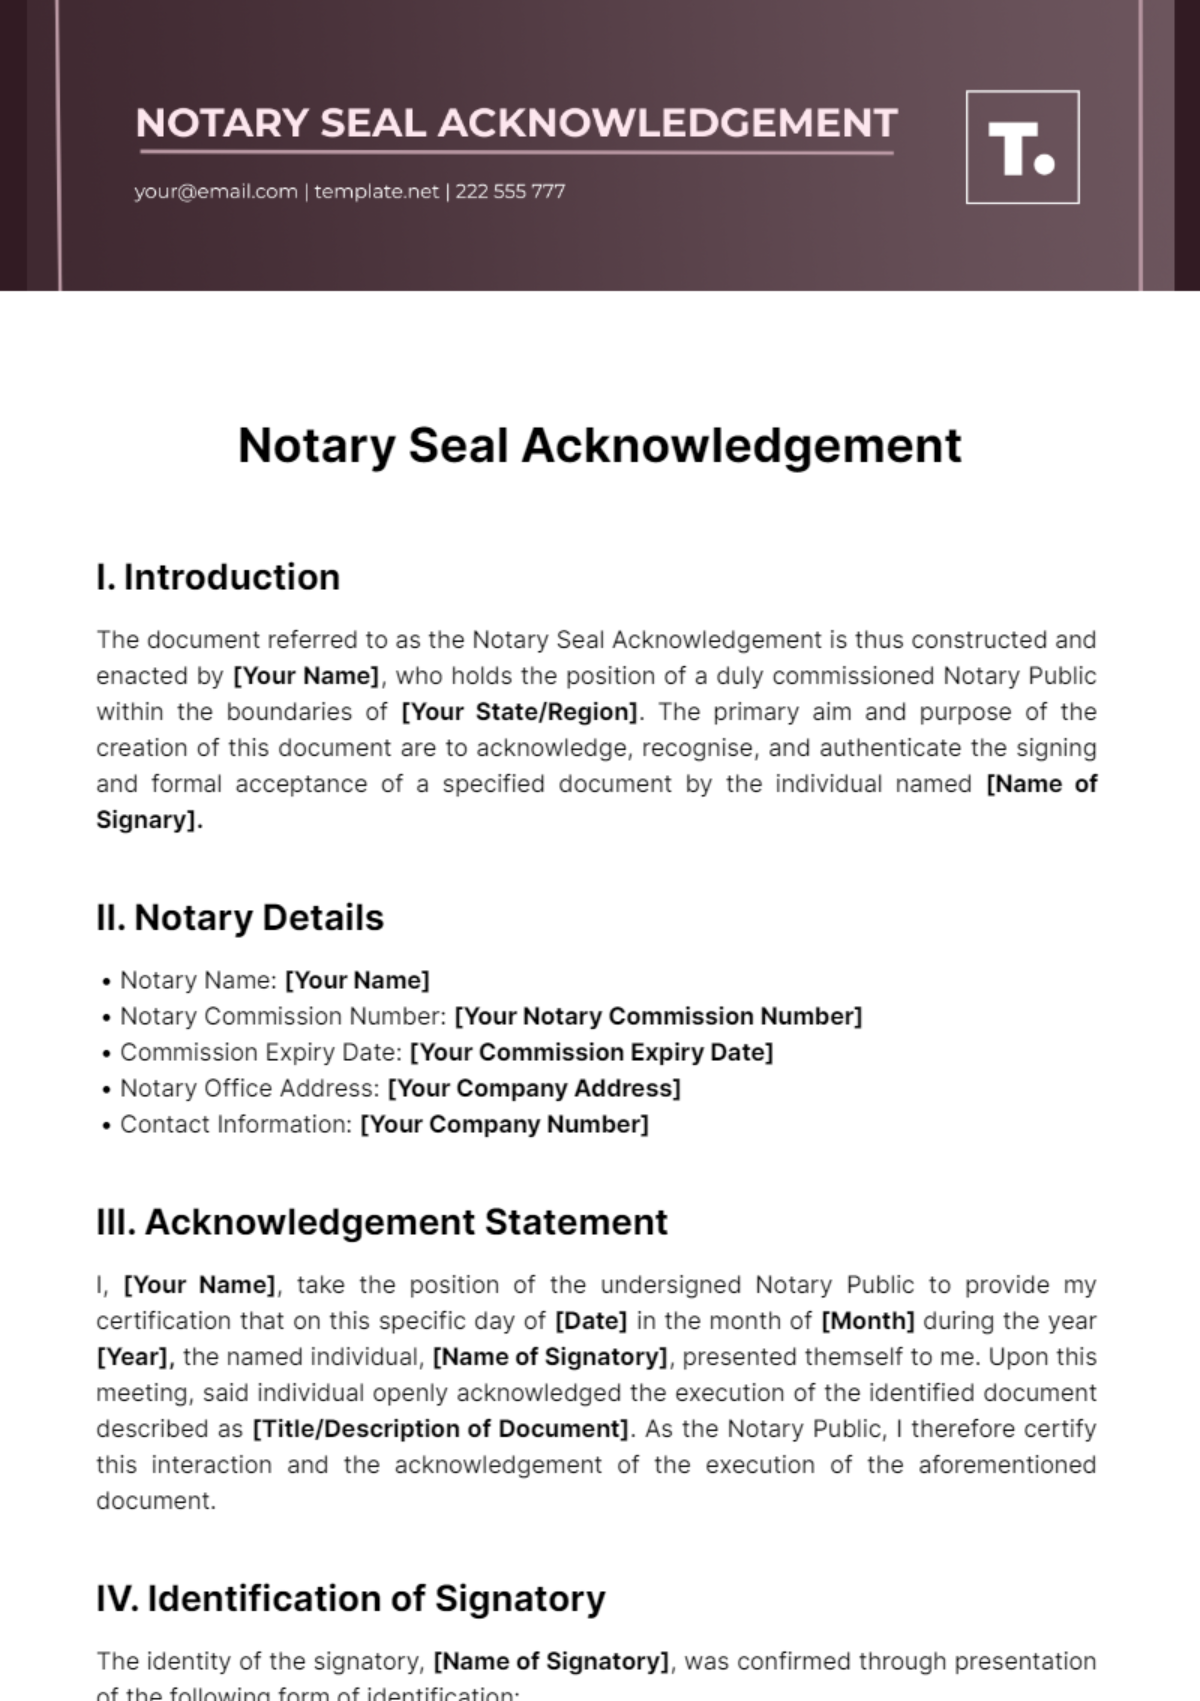 Notary Seal Acknowledgement Template